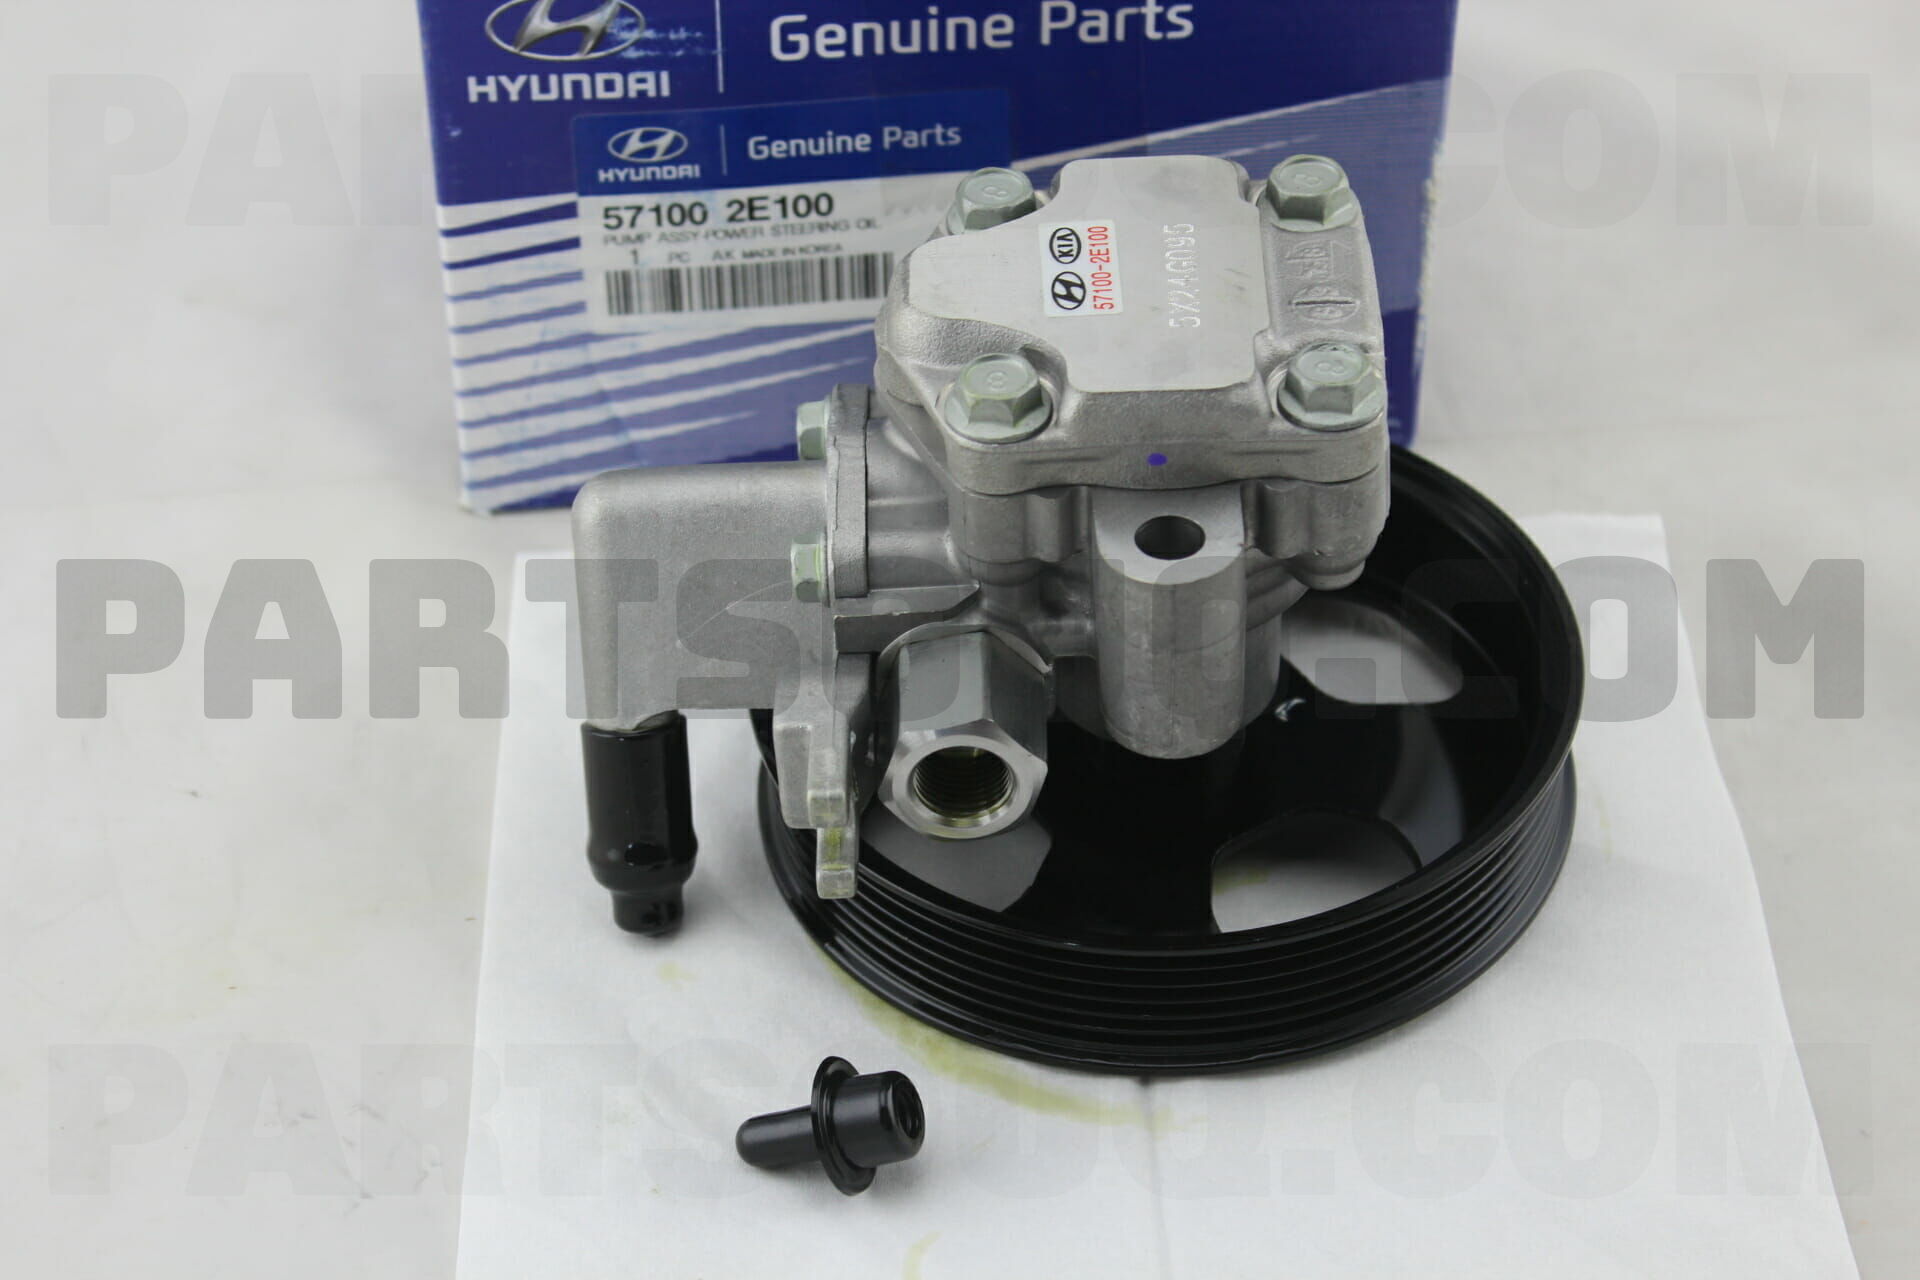 Genuine Hyundai 57126-1G000 Power Steering Oil Pump Cover Assembly